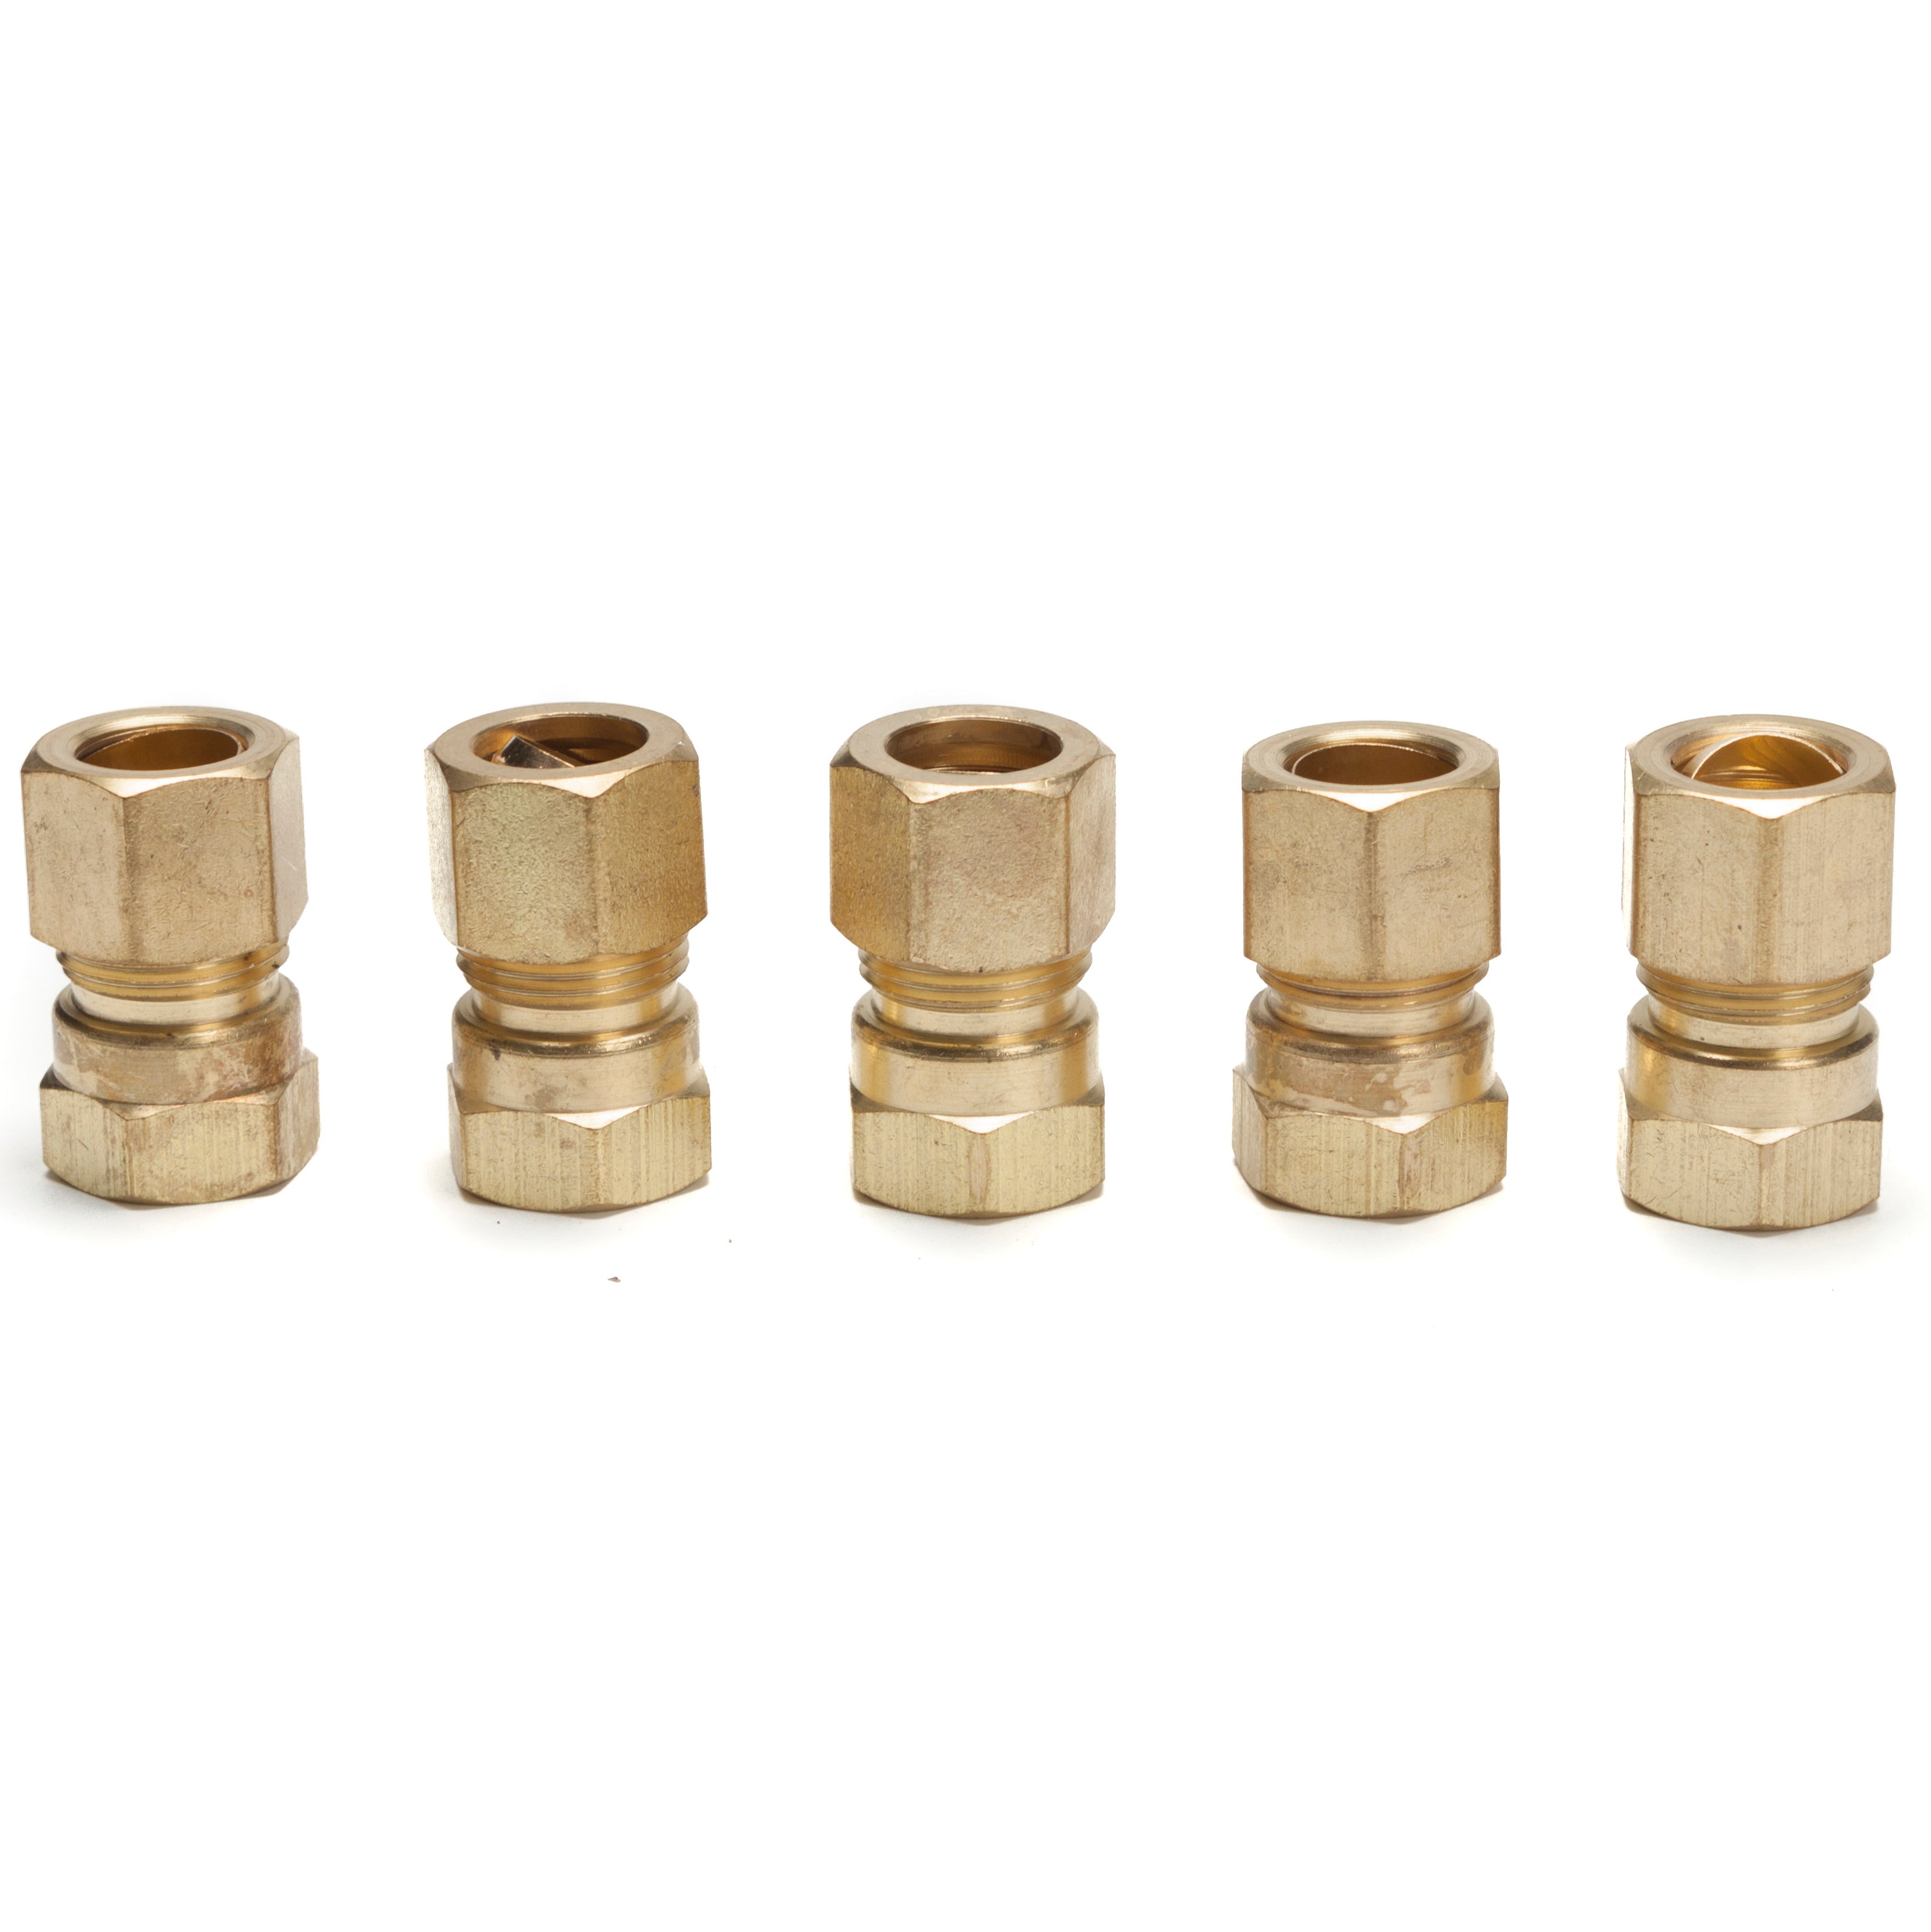 LTWFITTING Brass 1/2-Inch OD x 3/8-Inch Female NPT Compression Connector Fitting(Pack of 5)